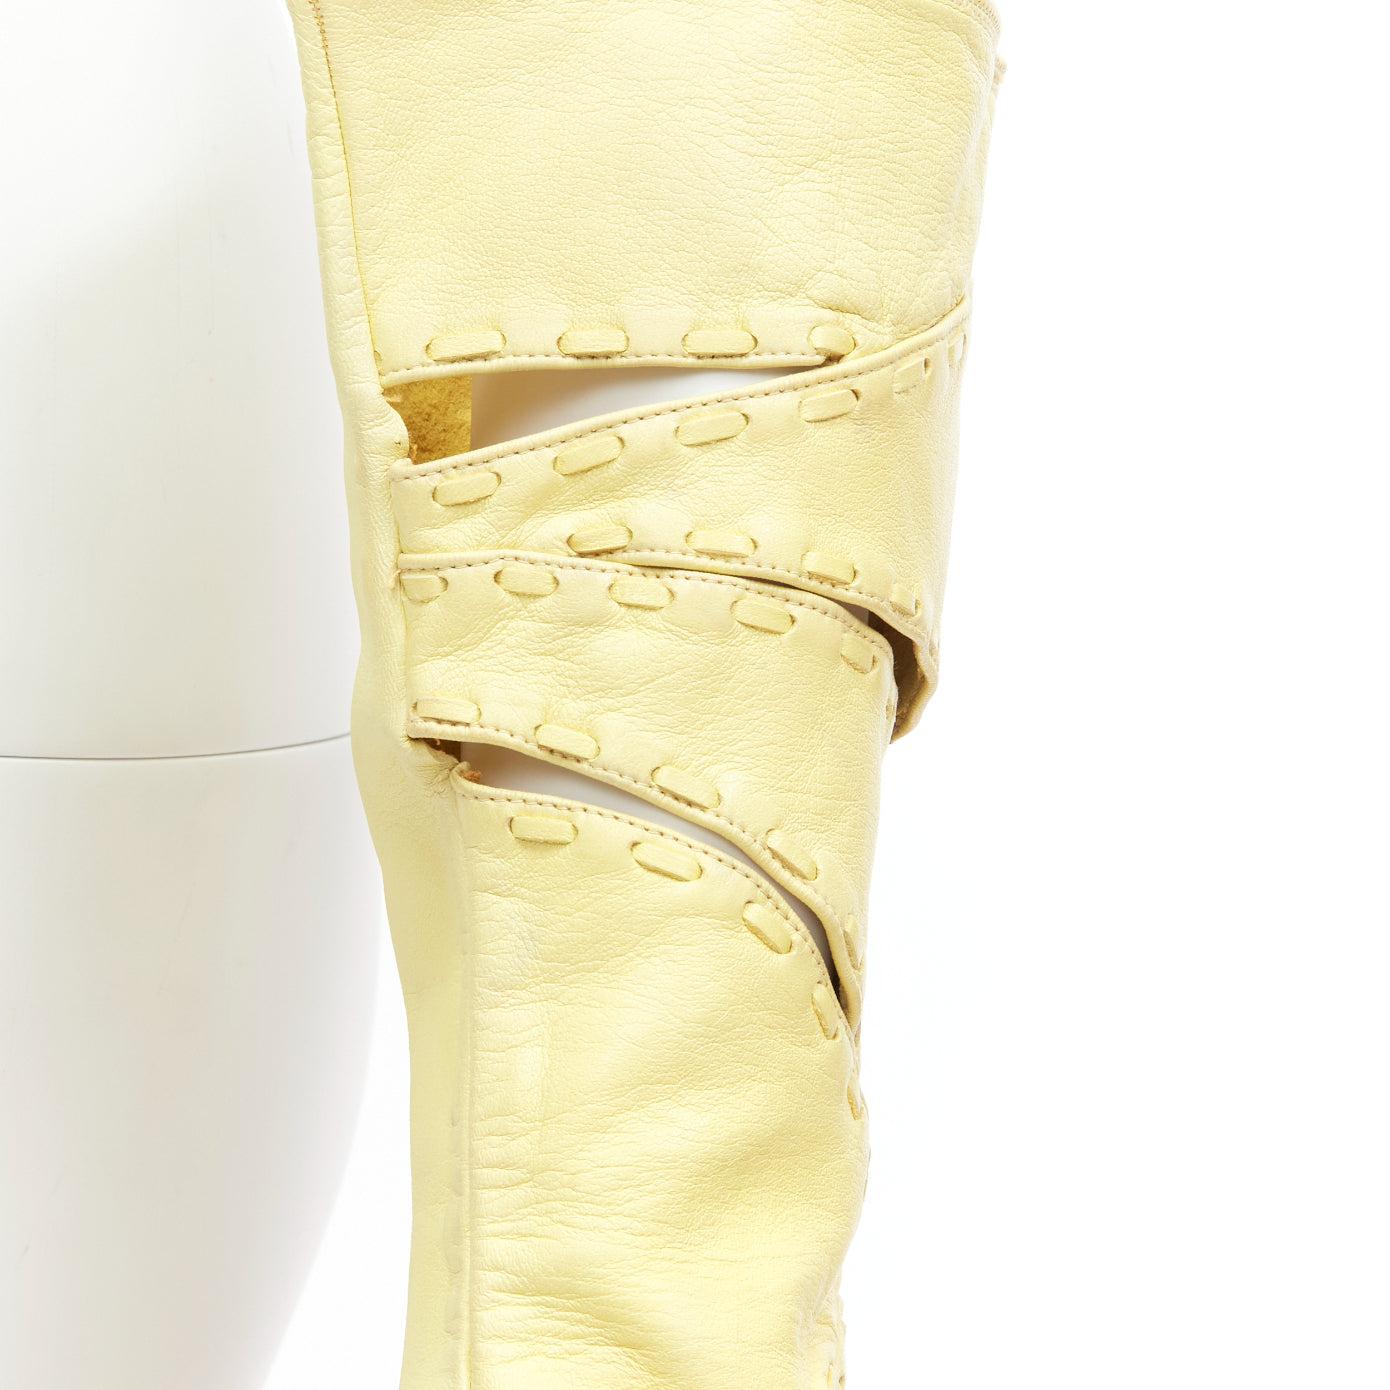 CLAUDE MONTANA Vintage yellow leather topstitch cut out gloves US7
Reference: GIYG/A00379
Brand: Claude Montana
Material: Leather
Color: Yellow
Pattern: Solid
Lining: Yellow Leather
Made in: France

CONDITION:
Condition: Fair, this item was